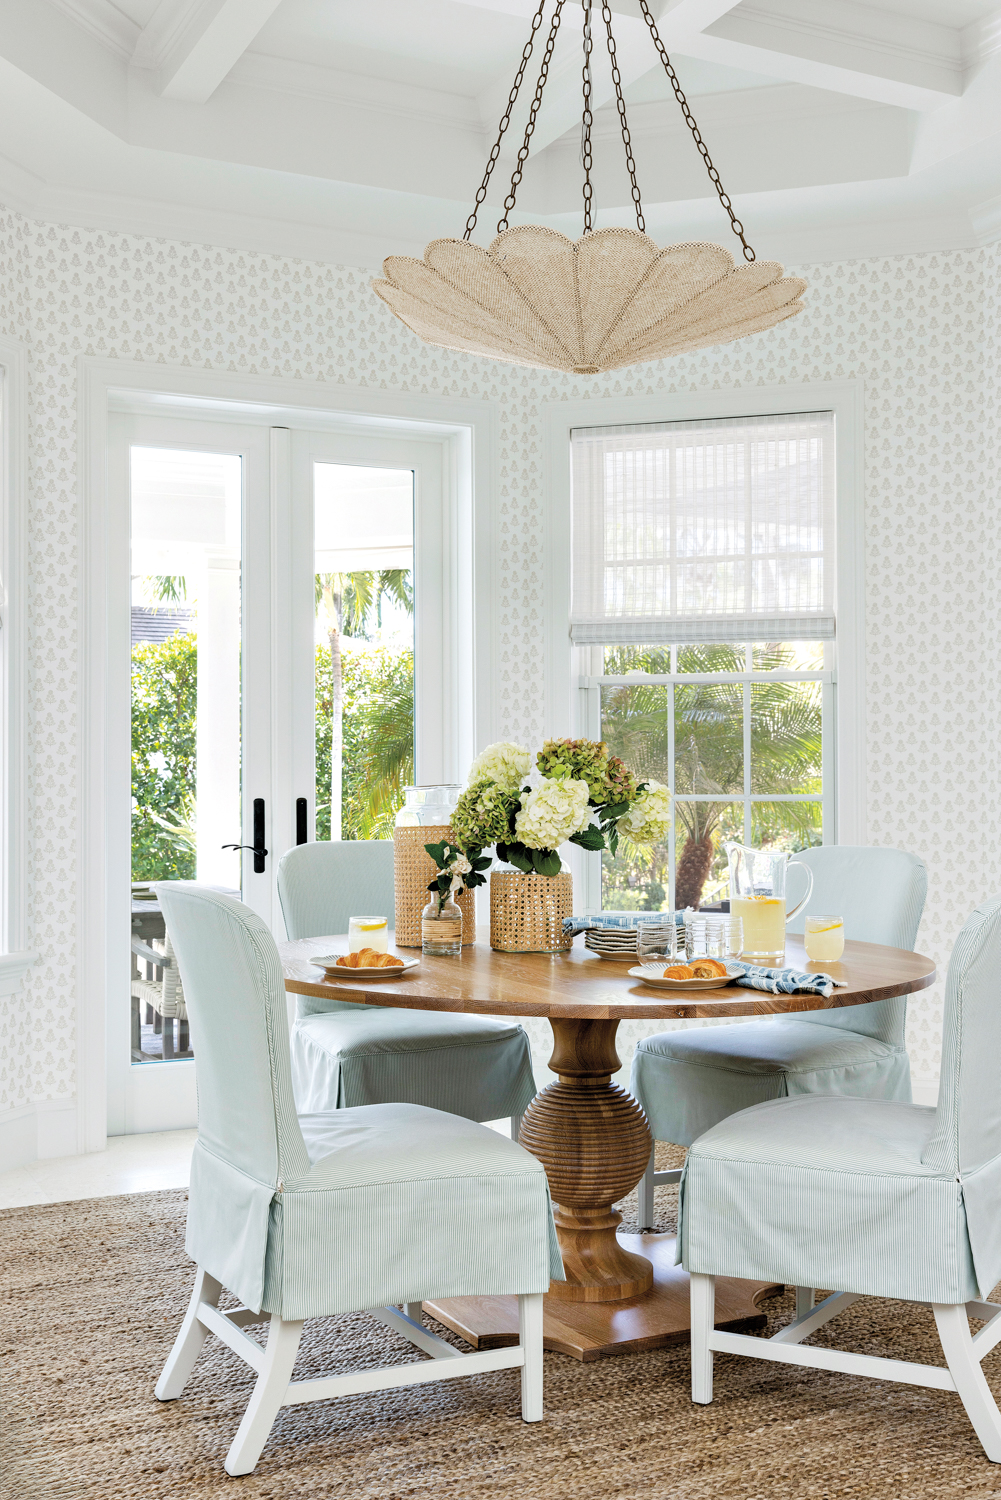 Breakfast nook with light patterned...